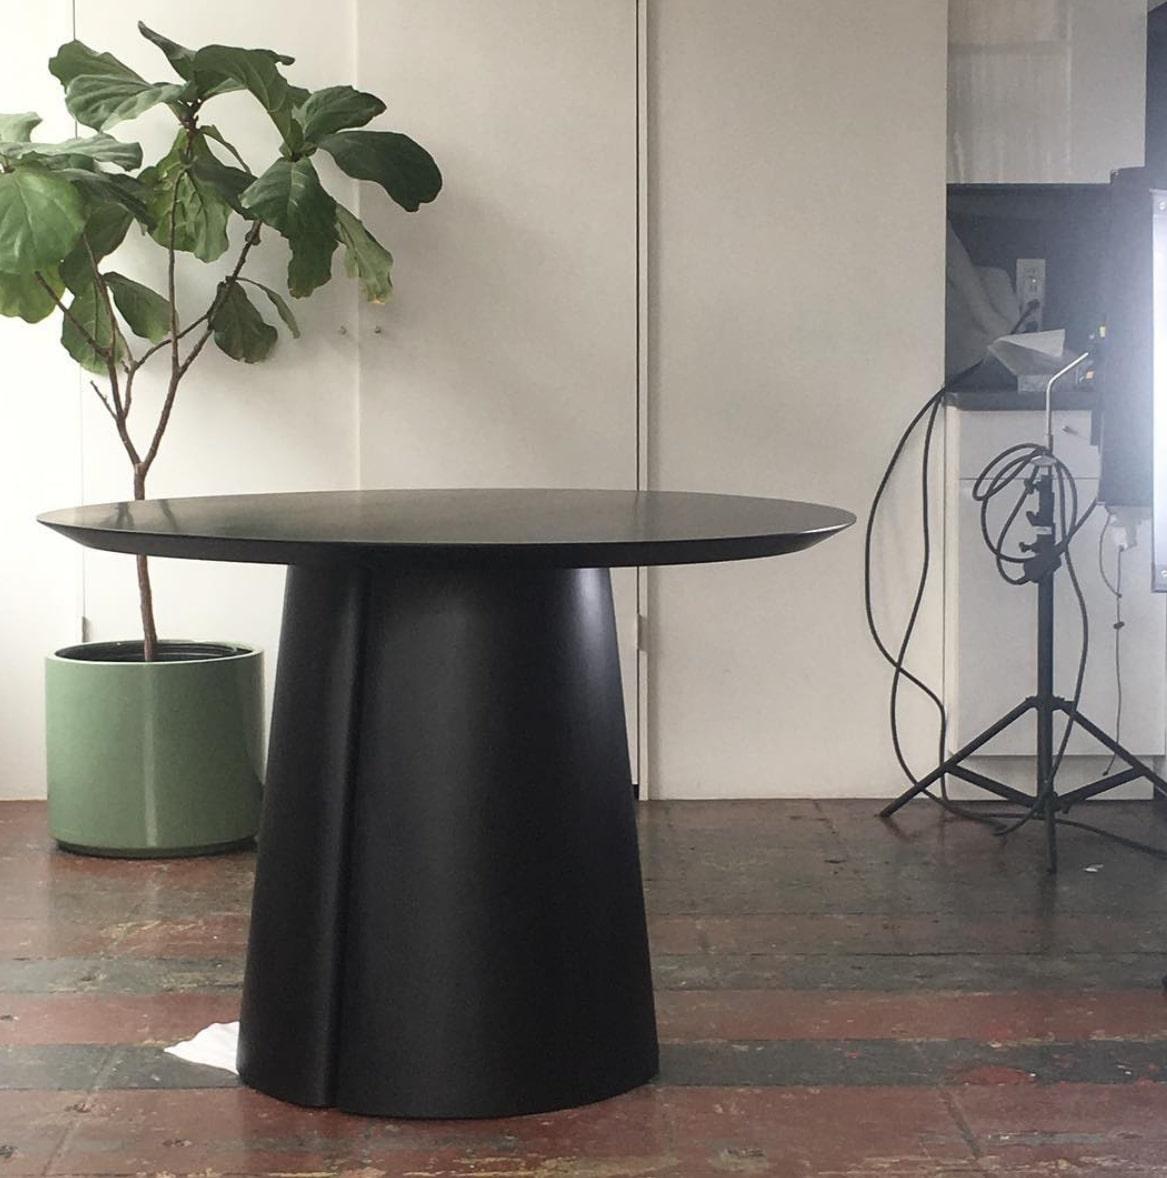 Contemporary Column Round Table by Black Table Studio, Rift, REP by Tuleste Factory For Sale